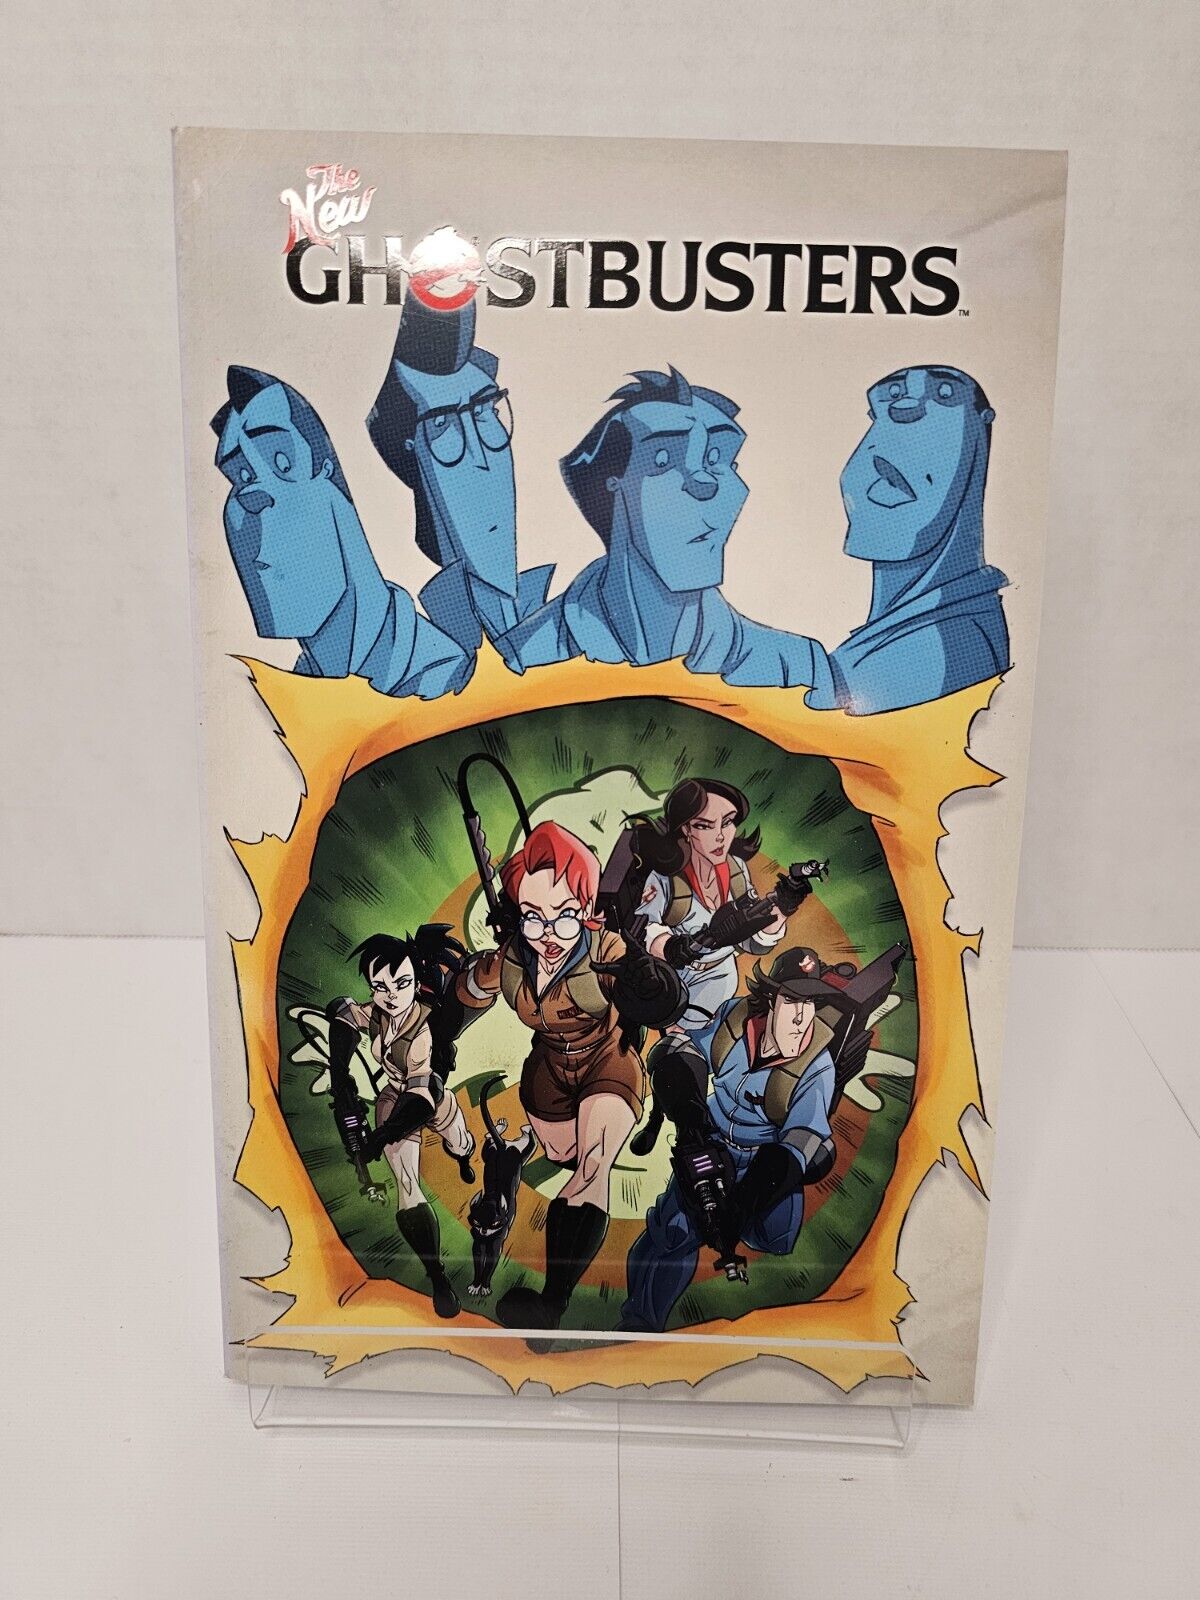 Ghostbusters #5 (IDW Publishing, July 2013)